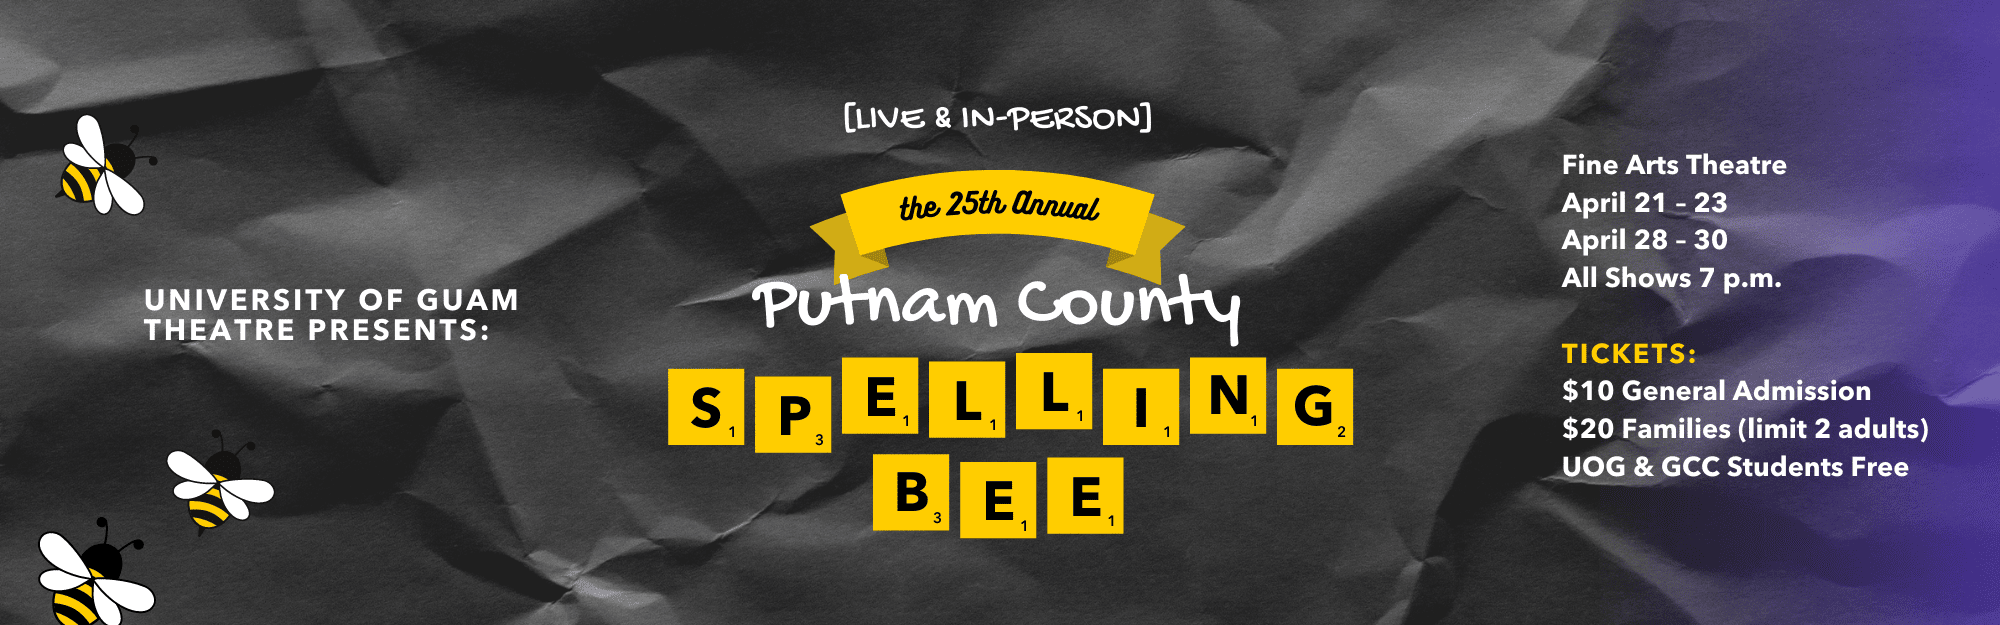 Watch the Putnam County Spelling Bee by the Fine Arts Theatre This April!